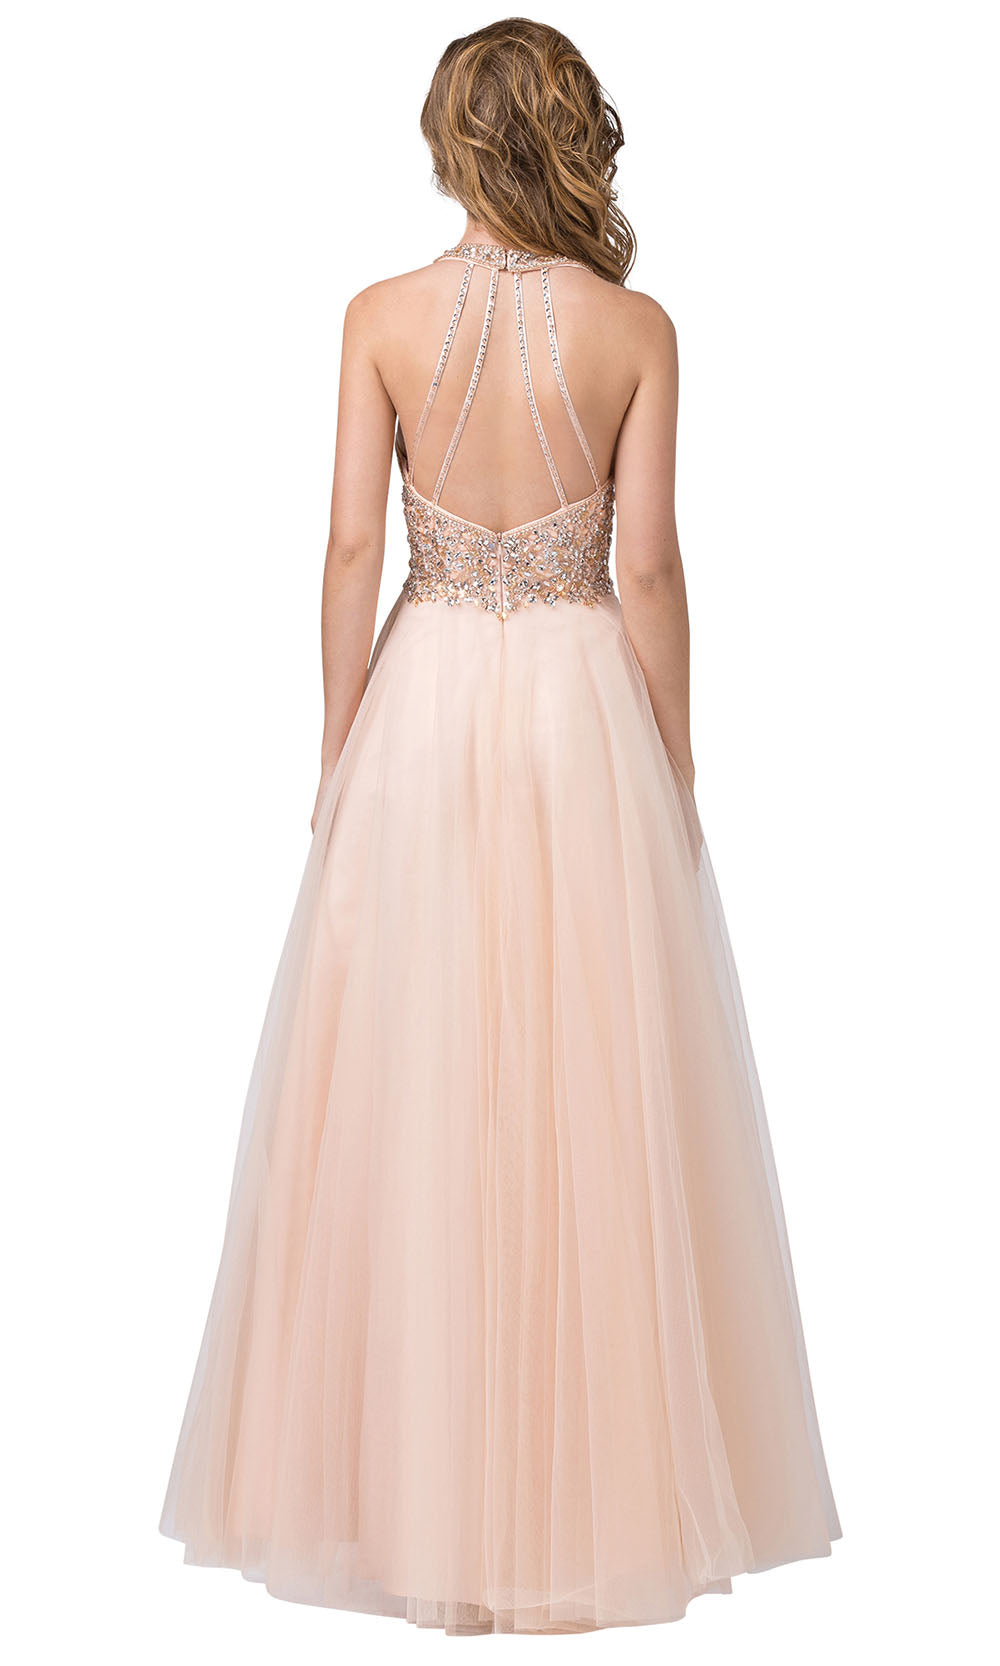 Dancing Queen - 2532 Embellished Deep V Neck A-Line Gown In Neutral